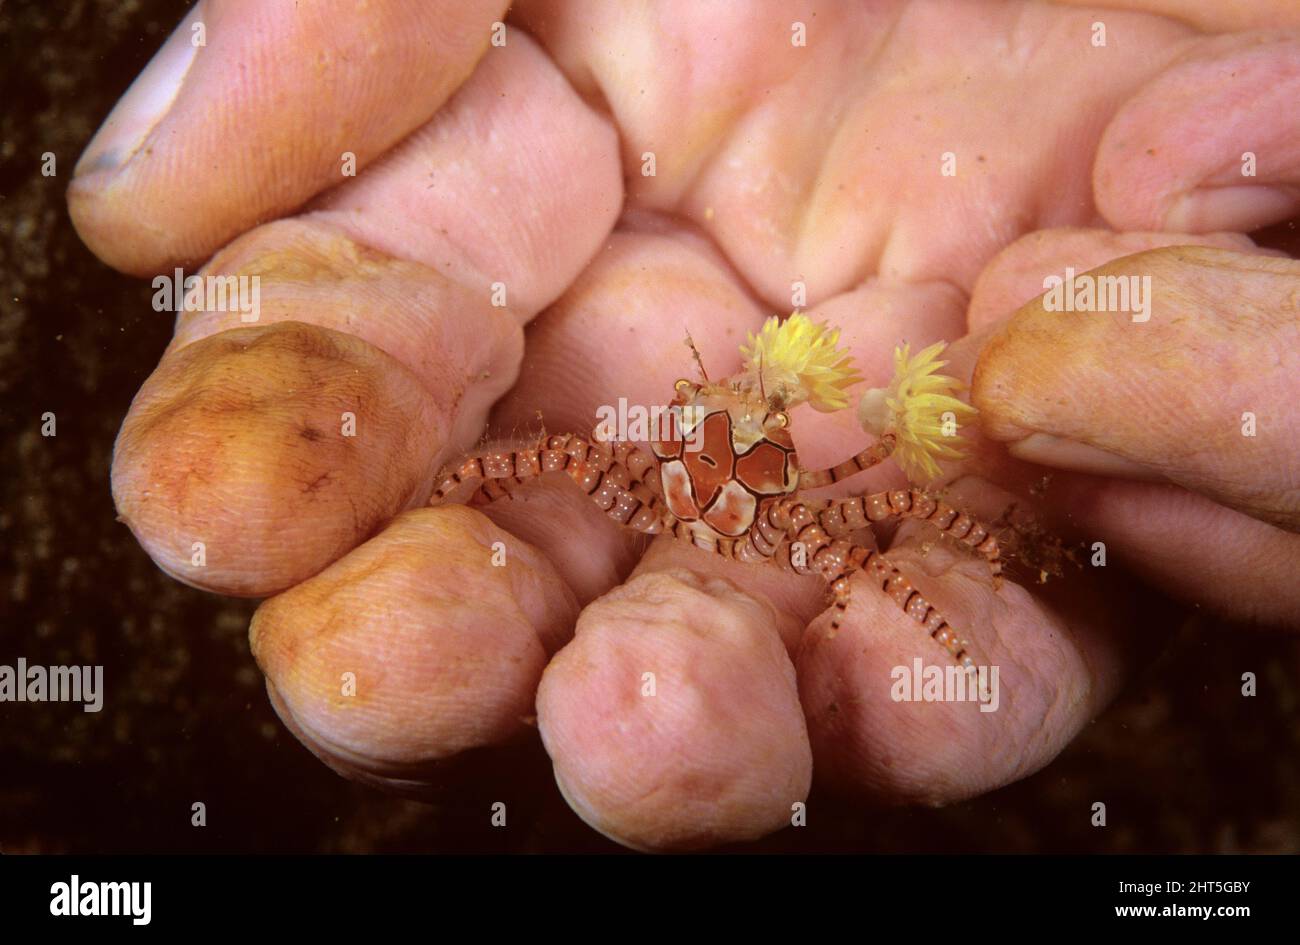 Boxer crab (Lybia tessellata), held in hand. There are stinging anemones in its claws for protection and for stunning prey. Stock Photo